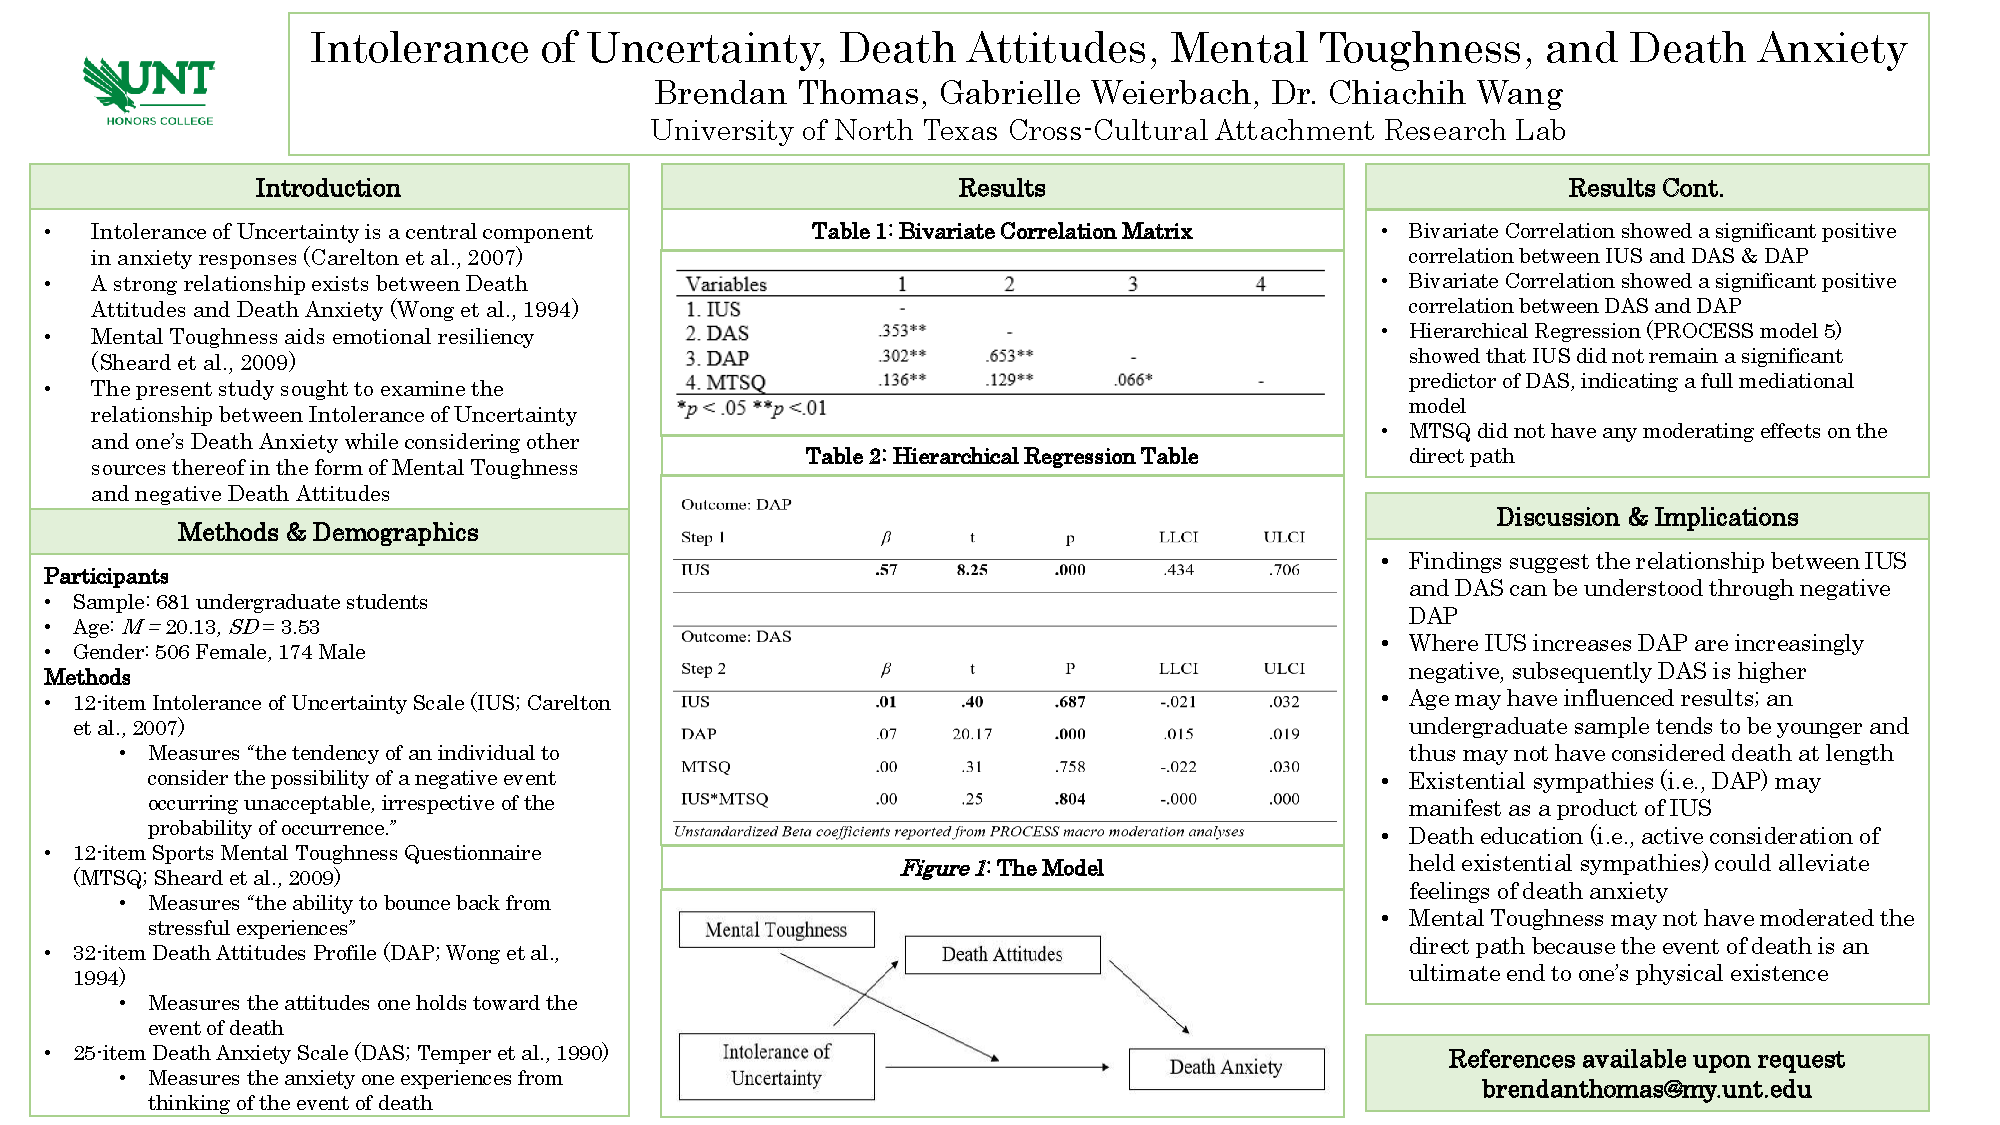 Intolerance of Uncertainty, Death Attitudes, Mental Toughness, and Death Anxiety